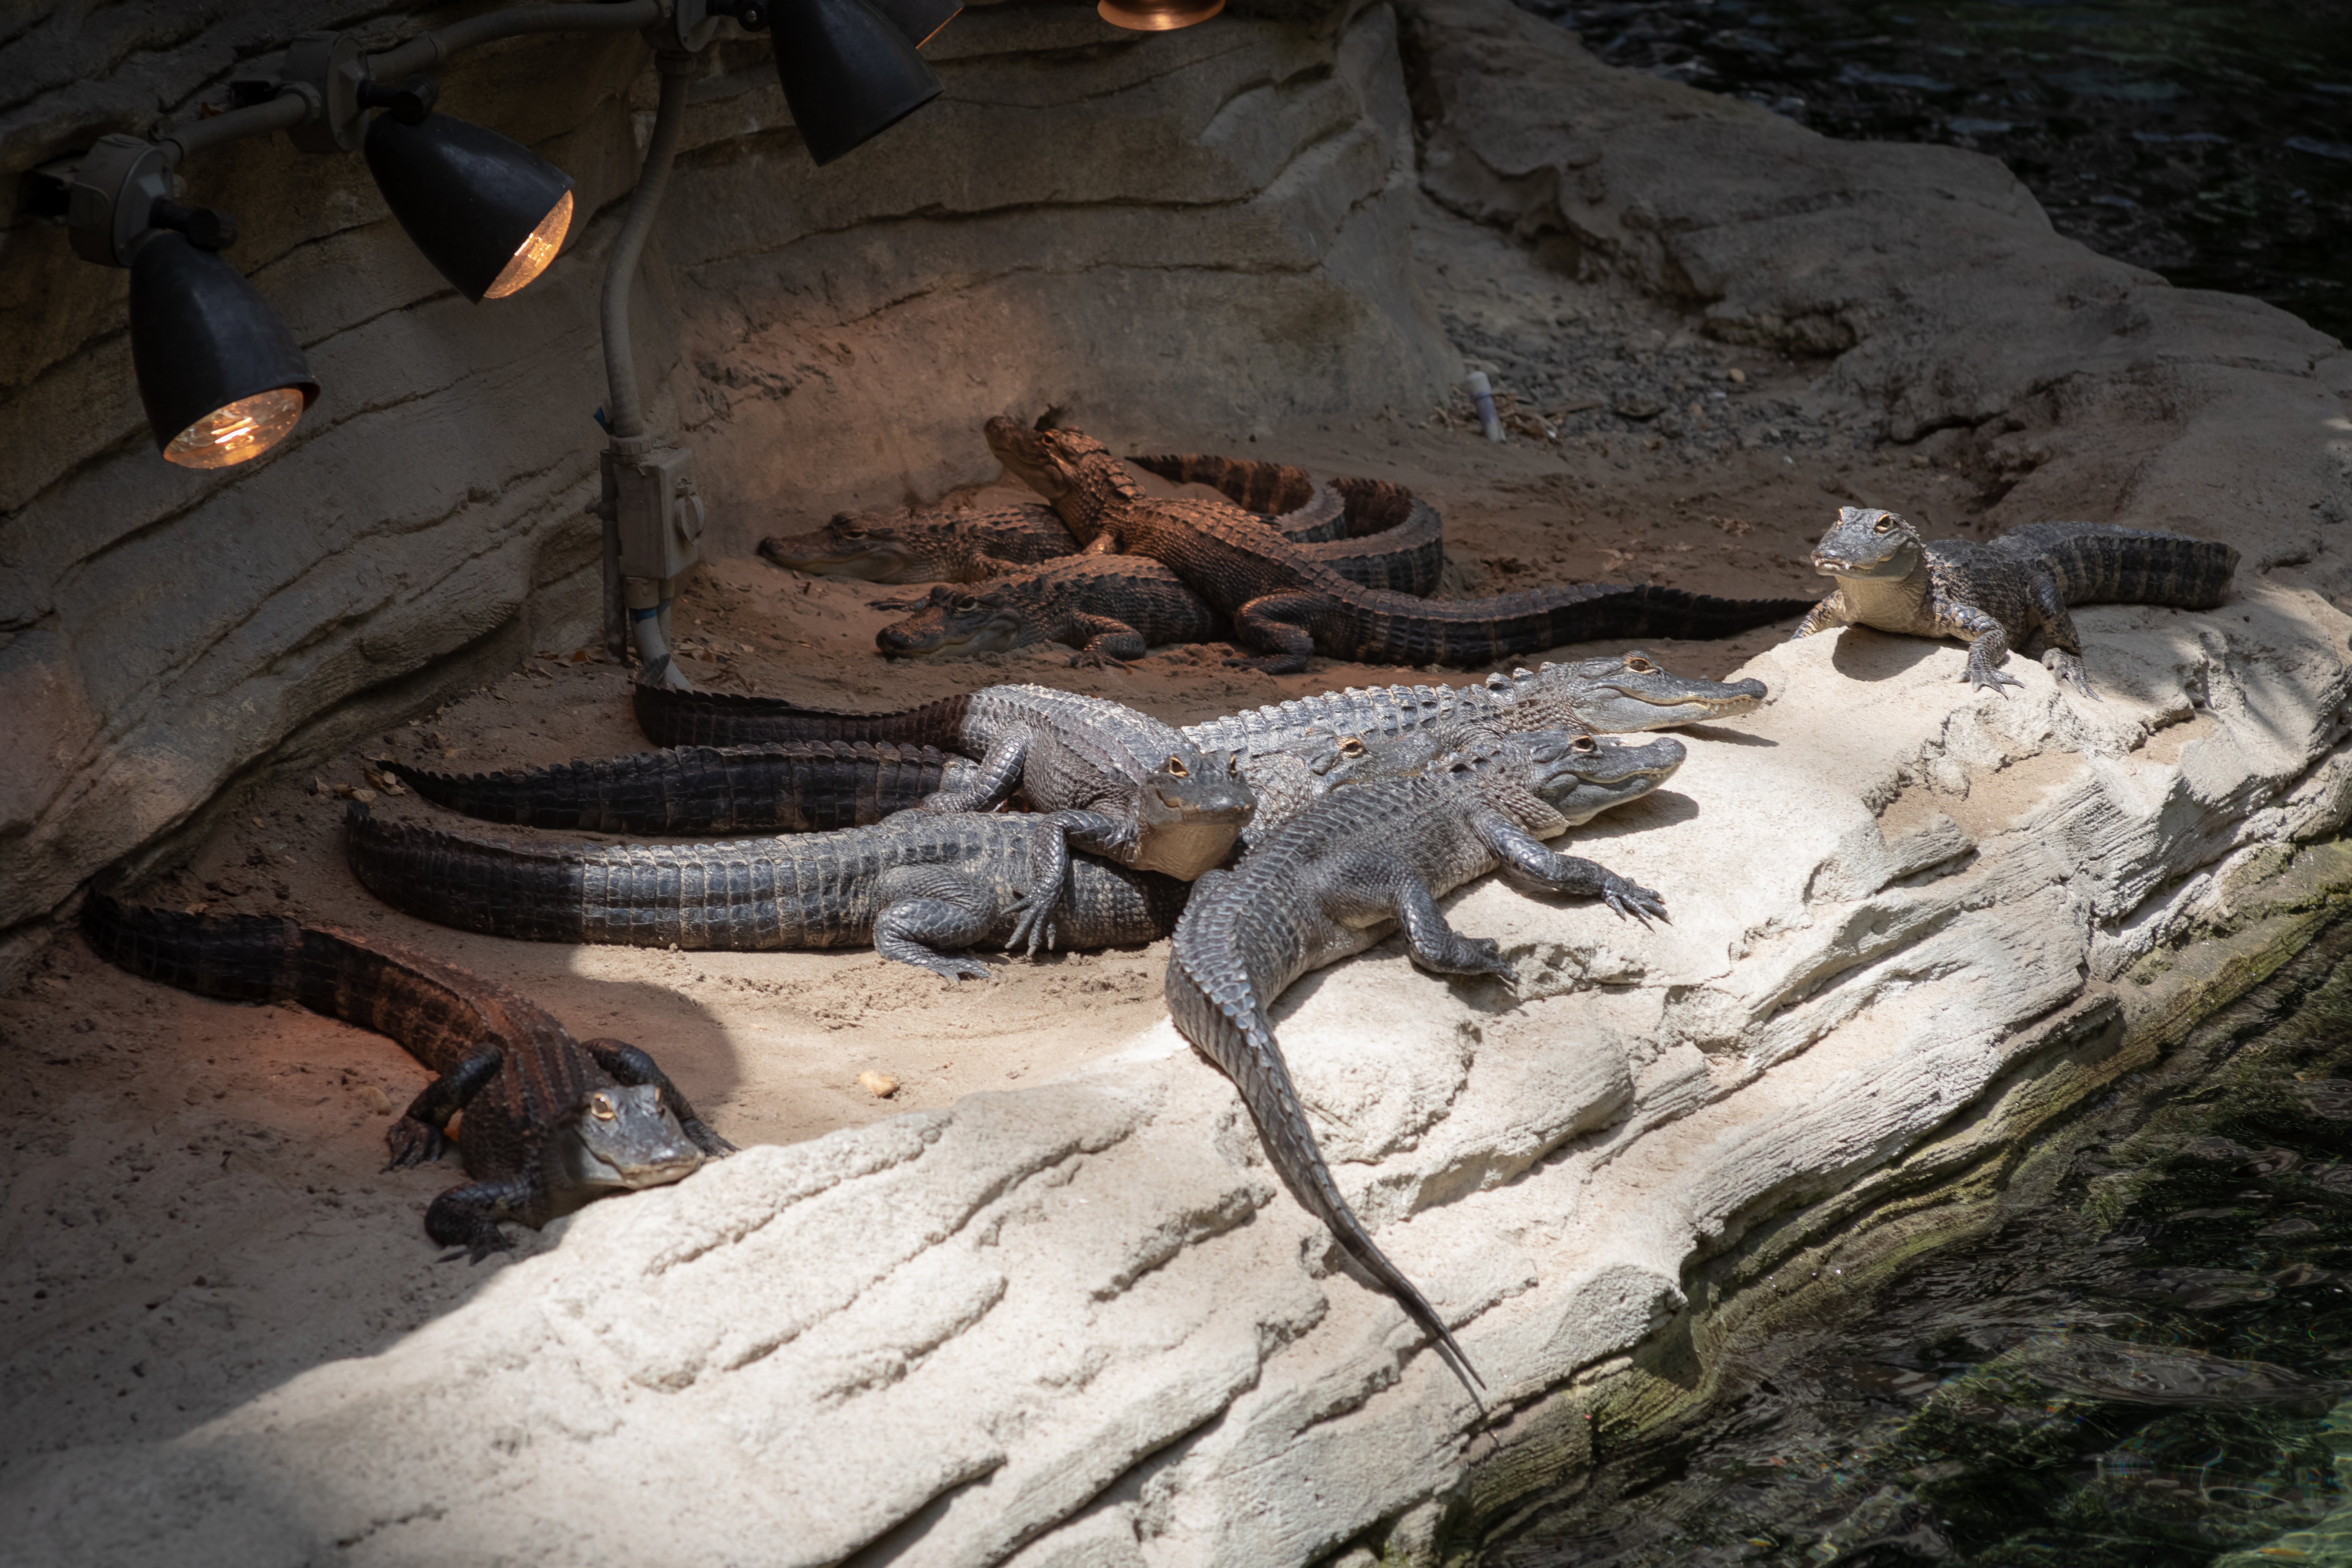 Gators on a rock under heat lamps at the Wild Florida exhibit at Gaylord Palms